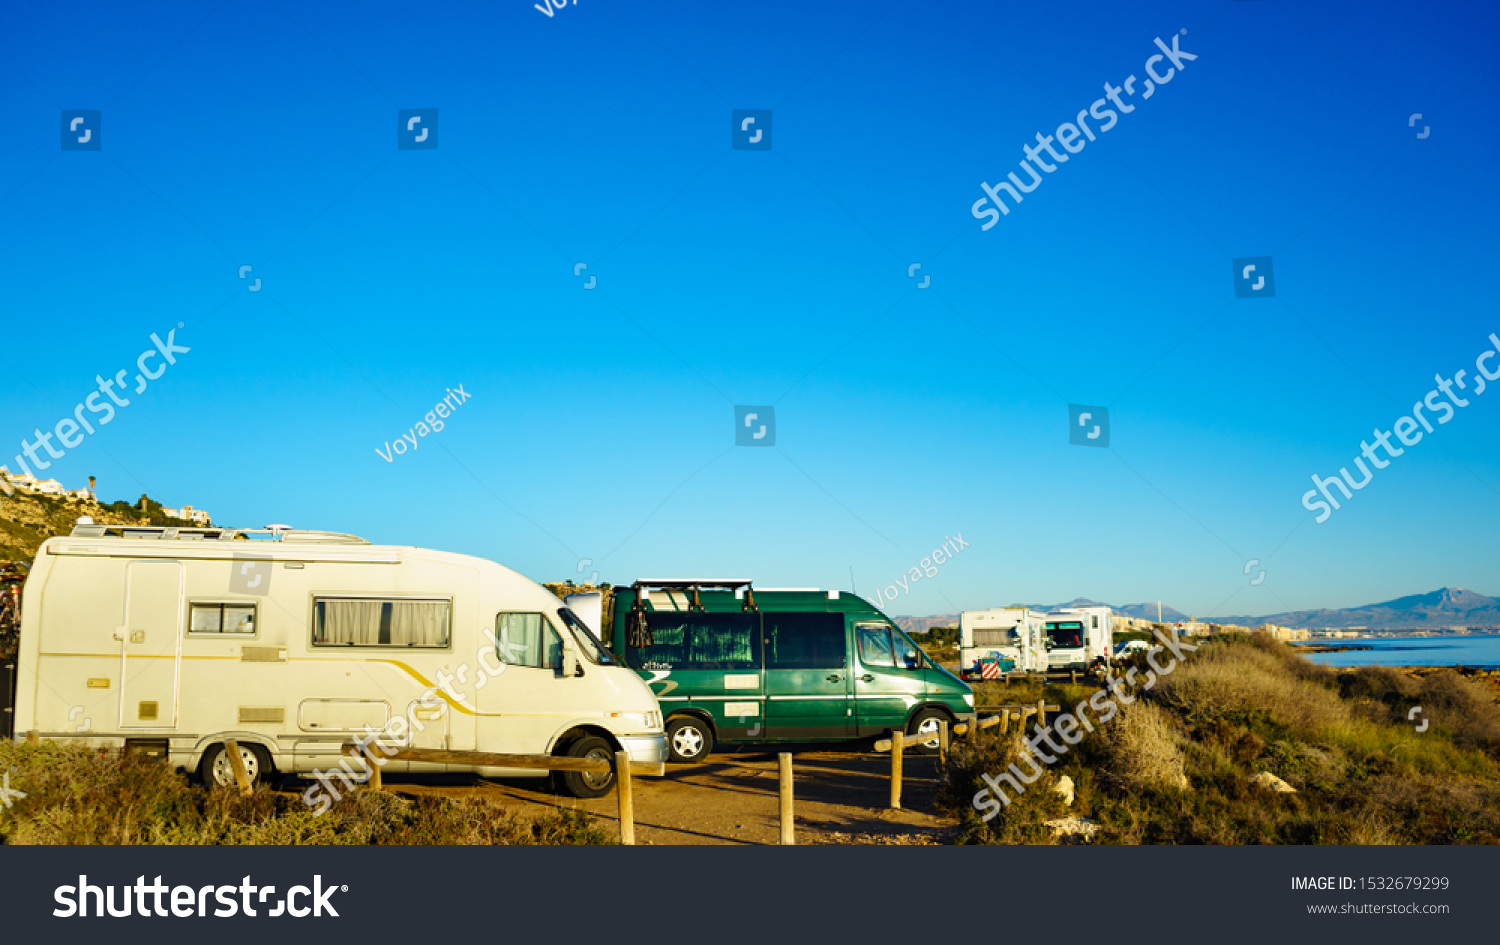 Camper, recreational vehicles on mediterranean coast in Spain. Camping on nature beach. Holidays and travel in motor home. #1532679299